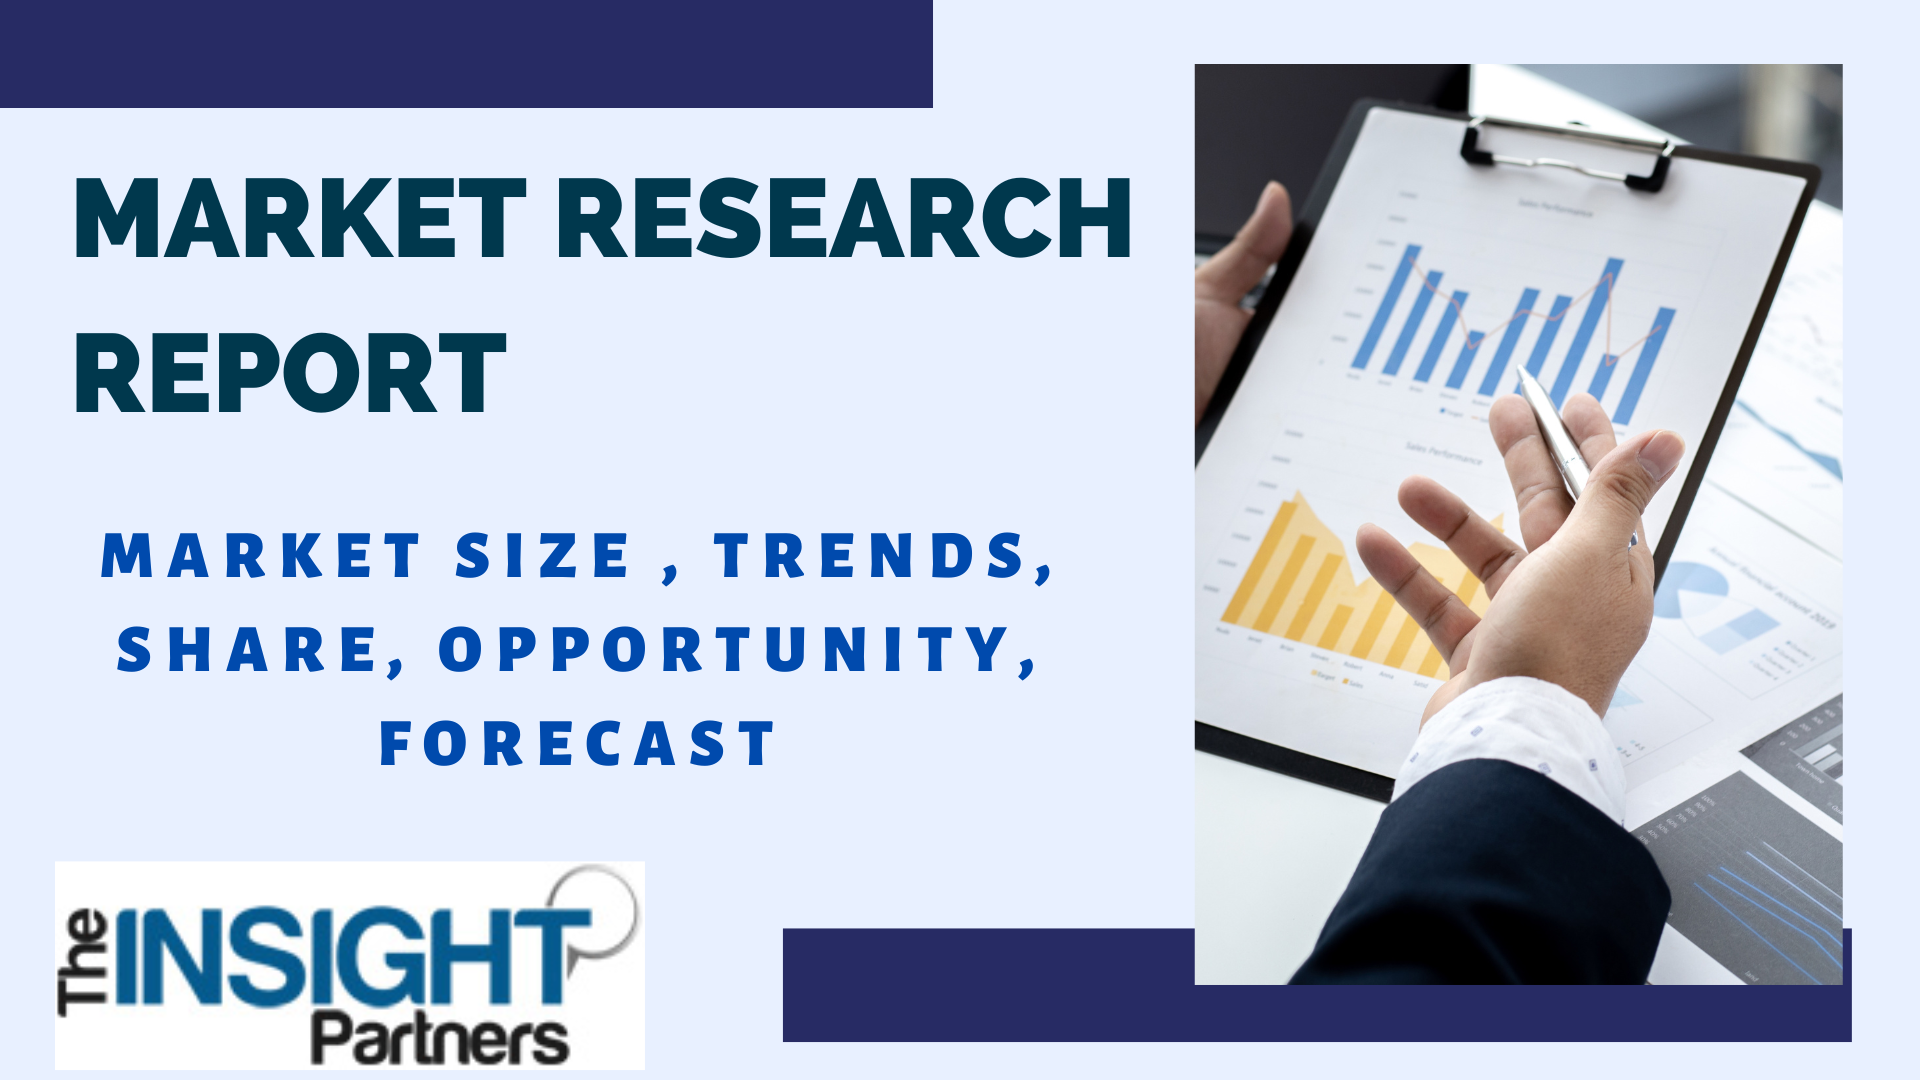 Basalt Fibers Market 2028 Growth Opportunities, Top Key Players, Industry Outlook and Forecasts